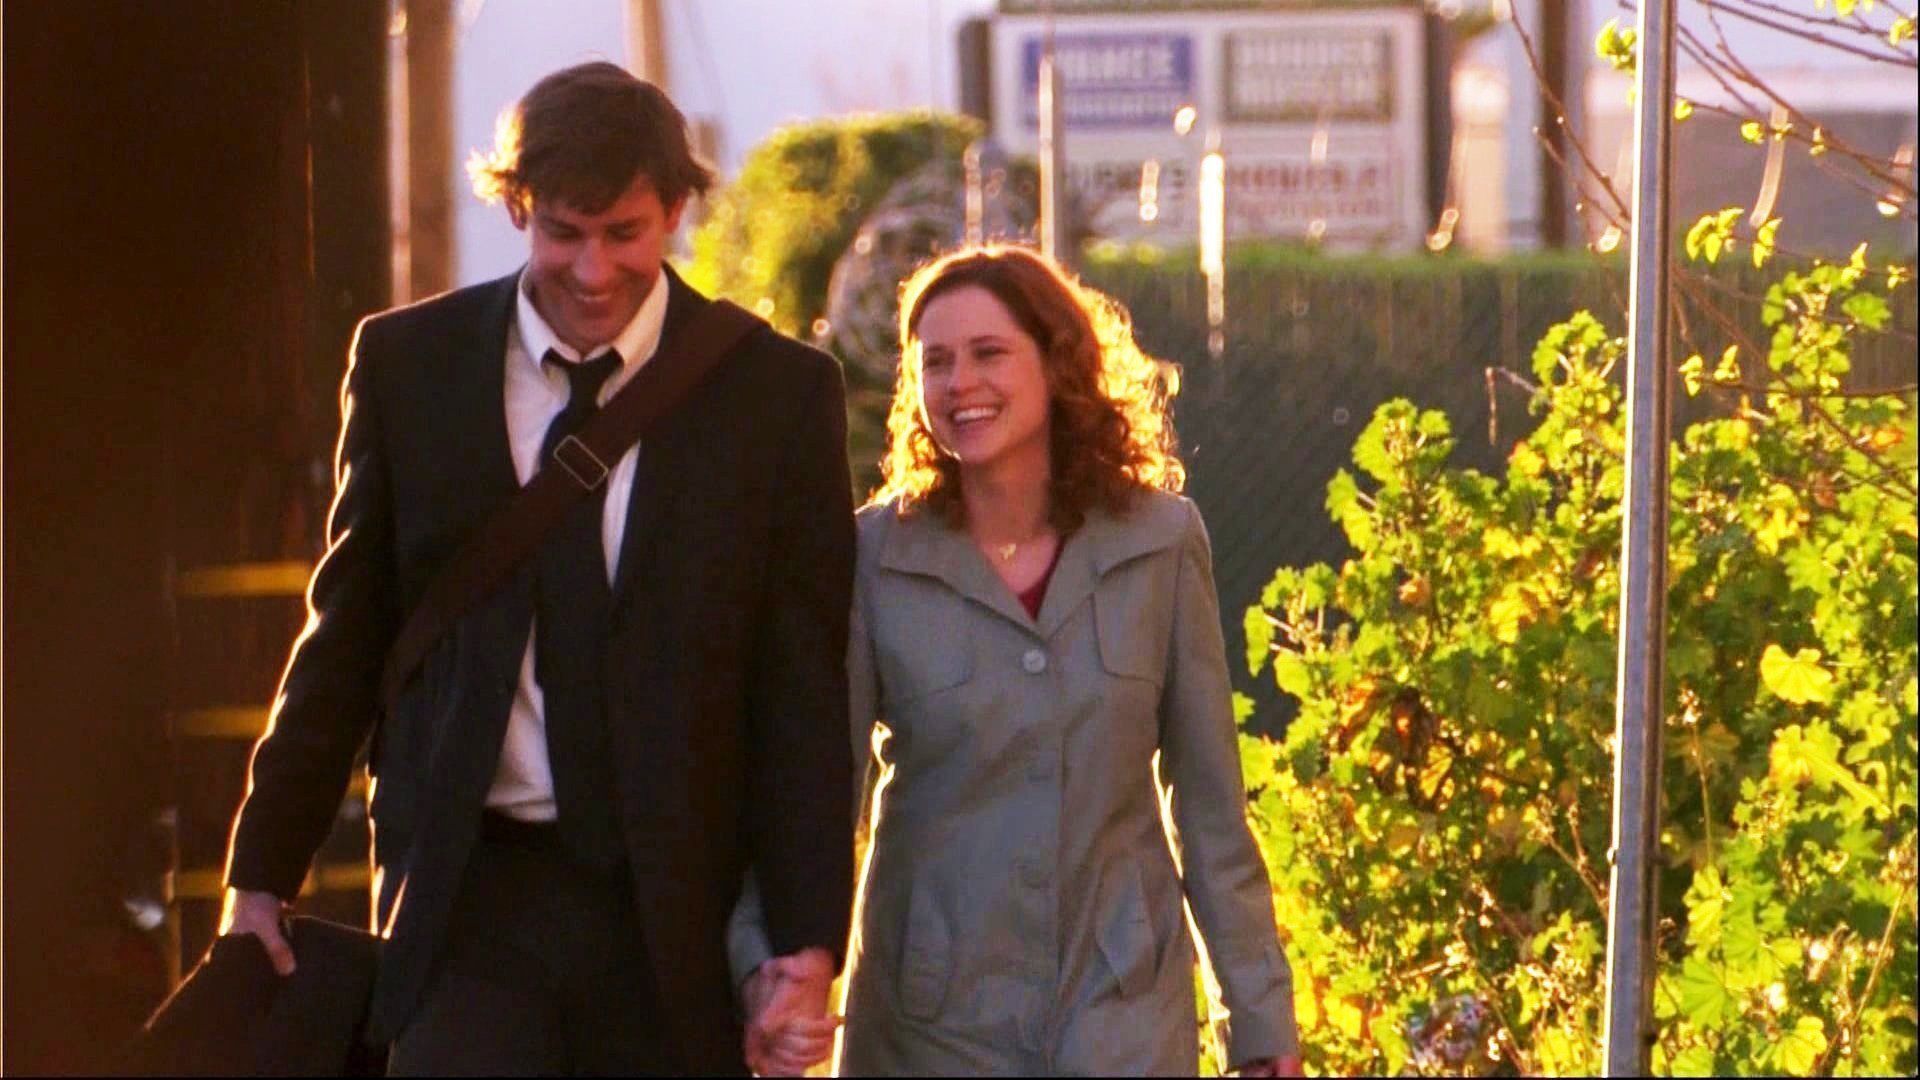 Jim & Pam. The office jim, The office characters, Tv couples